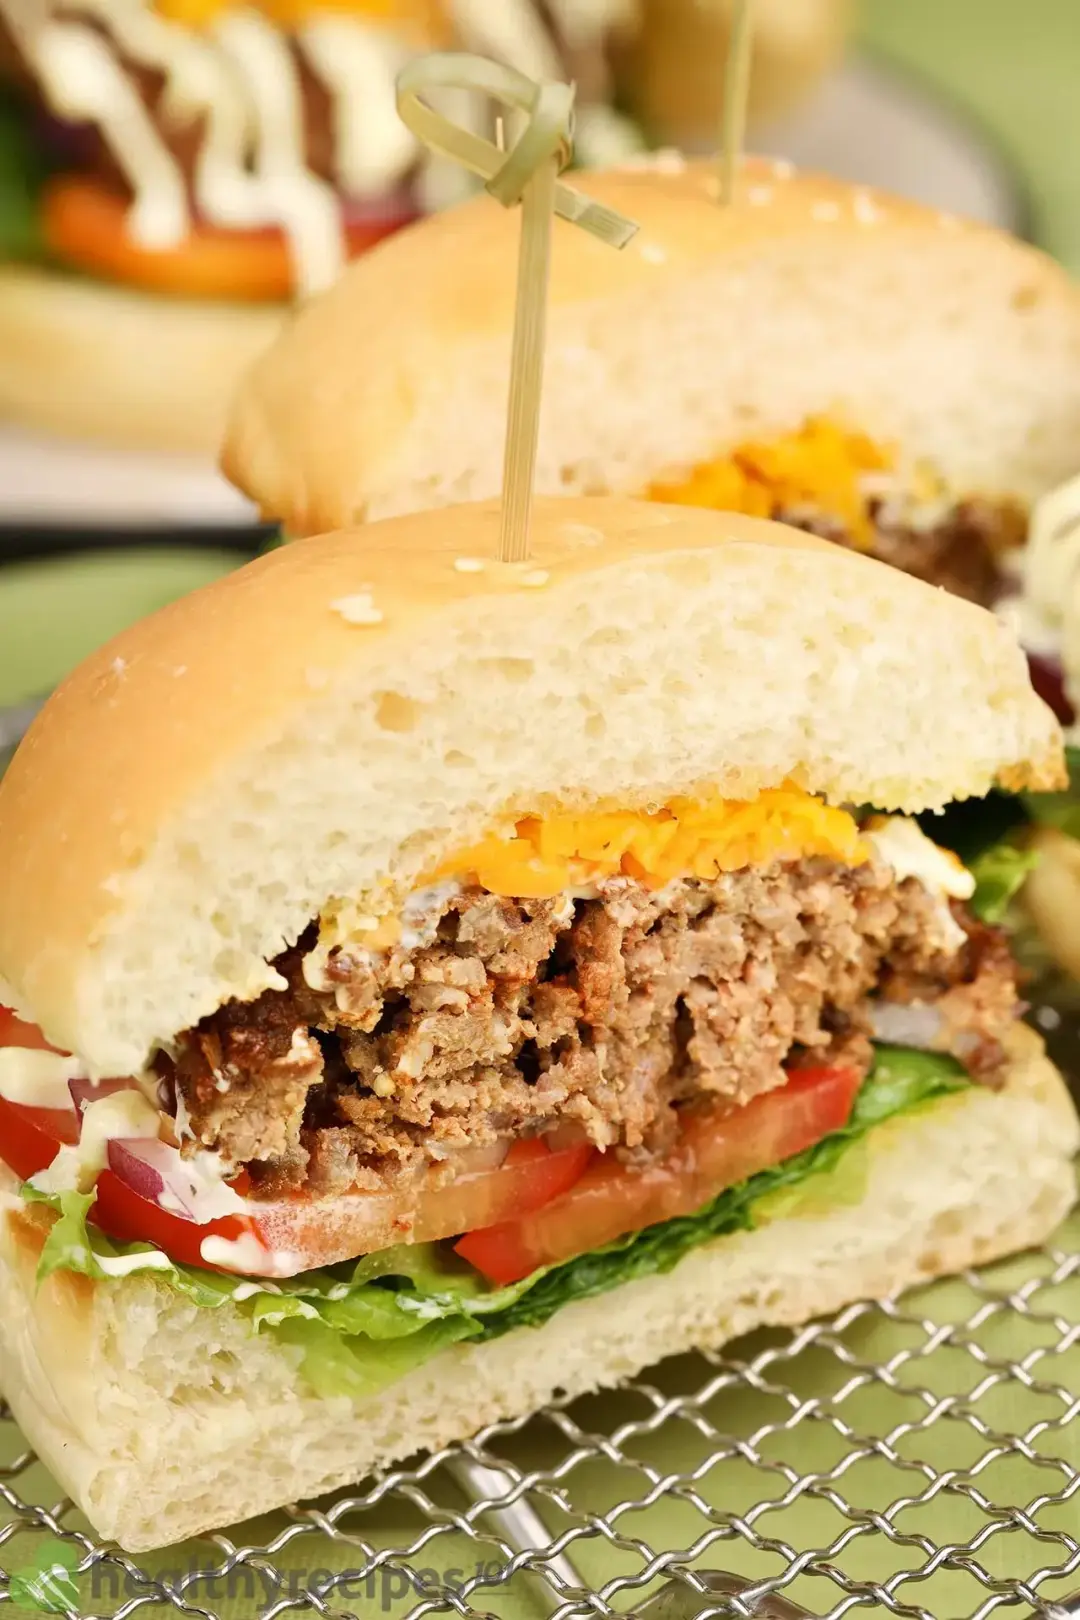 tips for making the best beef burger